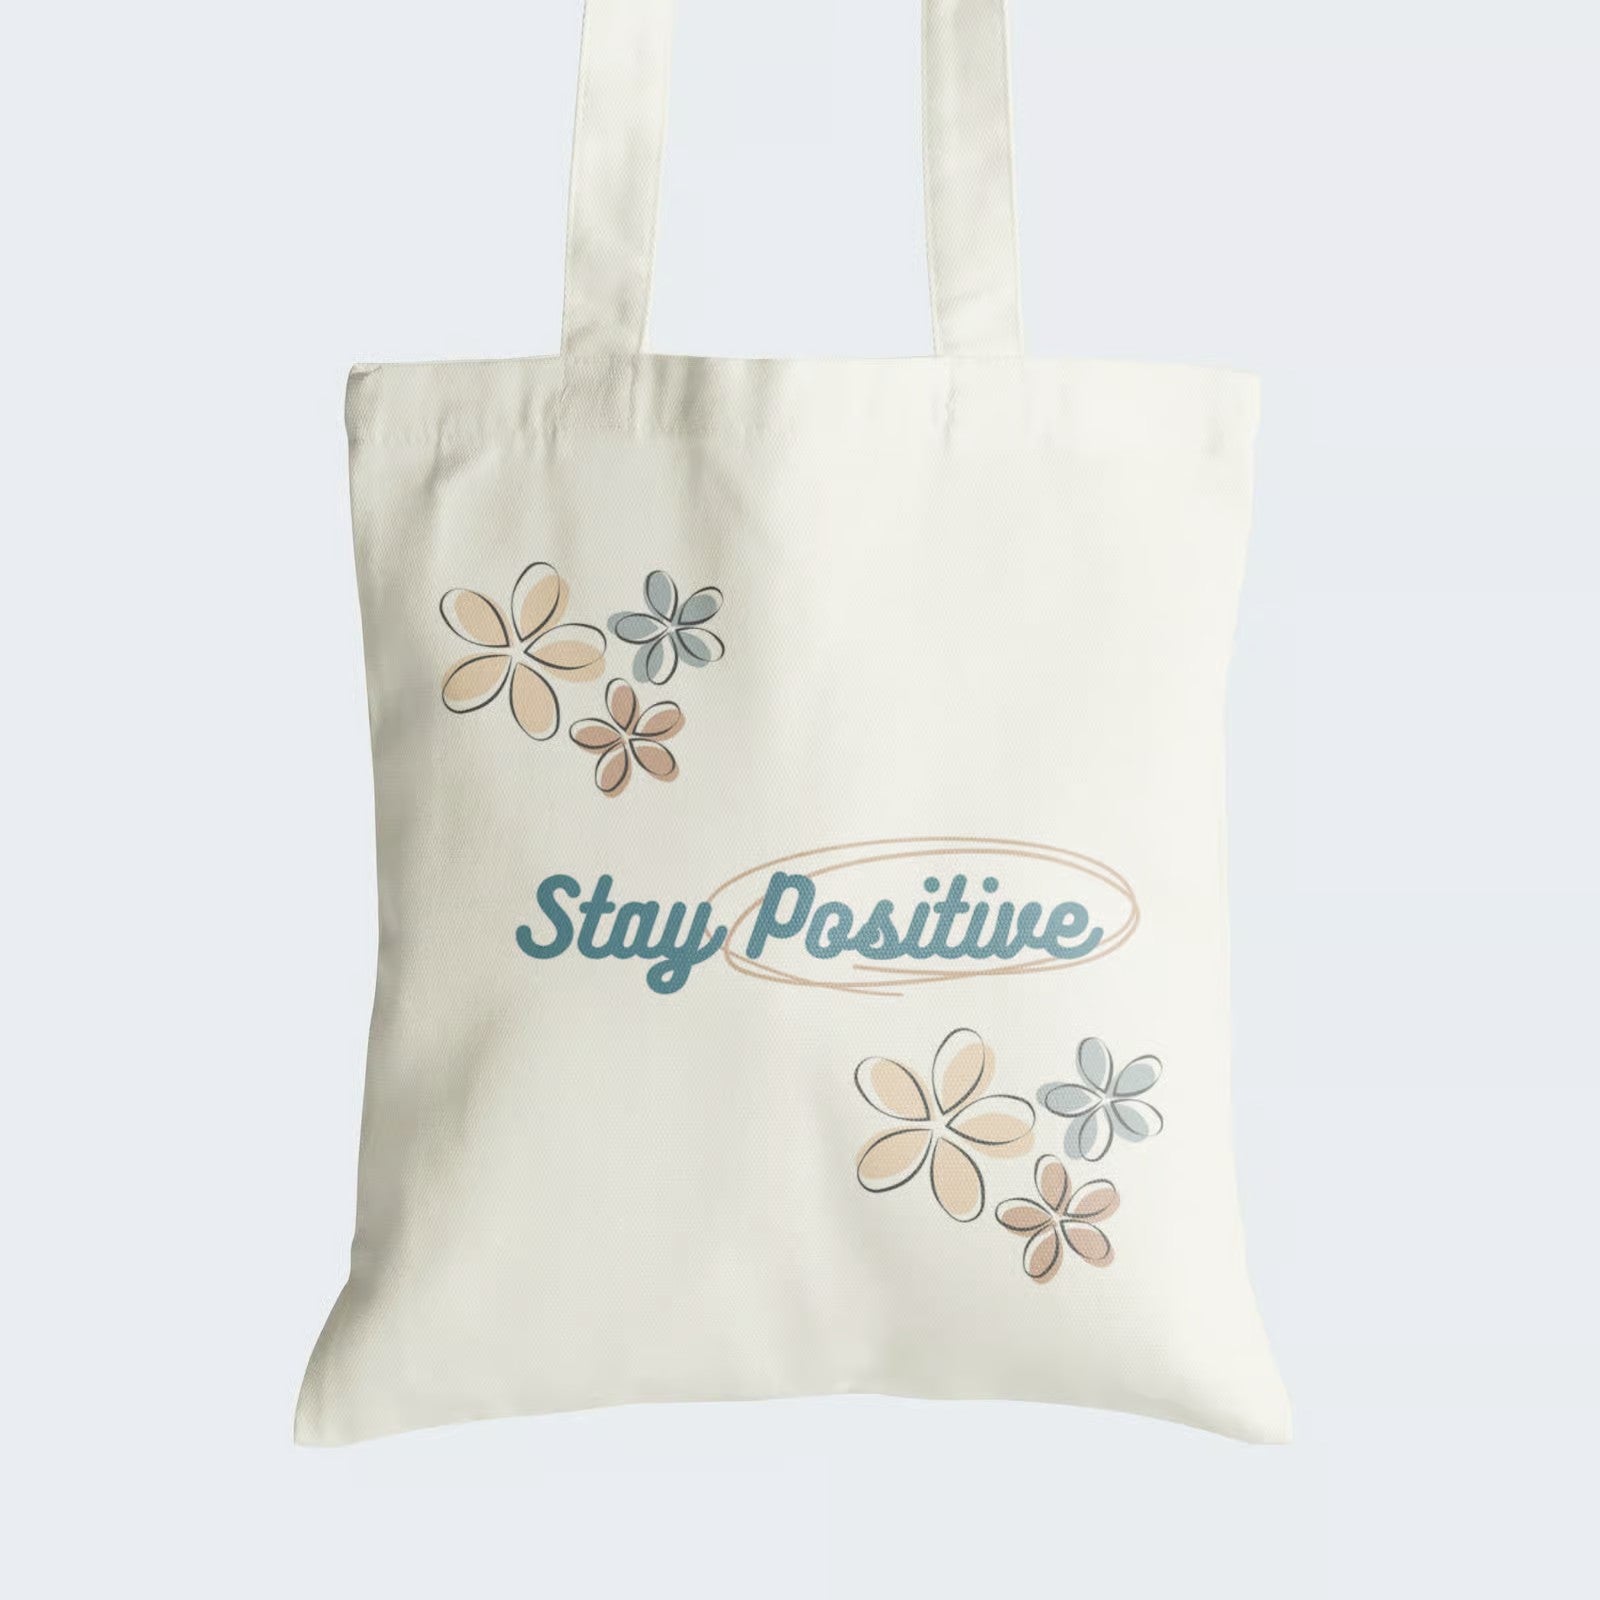 Elevate your style and uplift your spirits with our "Stay Positive" Cotton Canvas Tote Bag. This tote showcases an elegant cursive caption, "Stay Positive," enveloped in a beautifully hand-drawn circle, highlighting the importance of optimism. Crafted for both durability and style, it includes a secure zipper closure for daily convenience. Carry the message of positivity and radiate good vibes with our stylish Cotton Canvas Tote Bag. Order yours today and stay inspired!